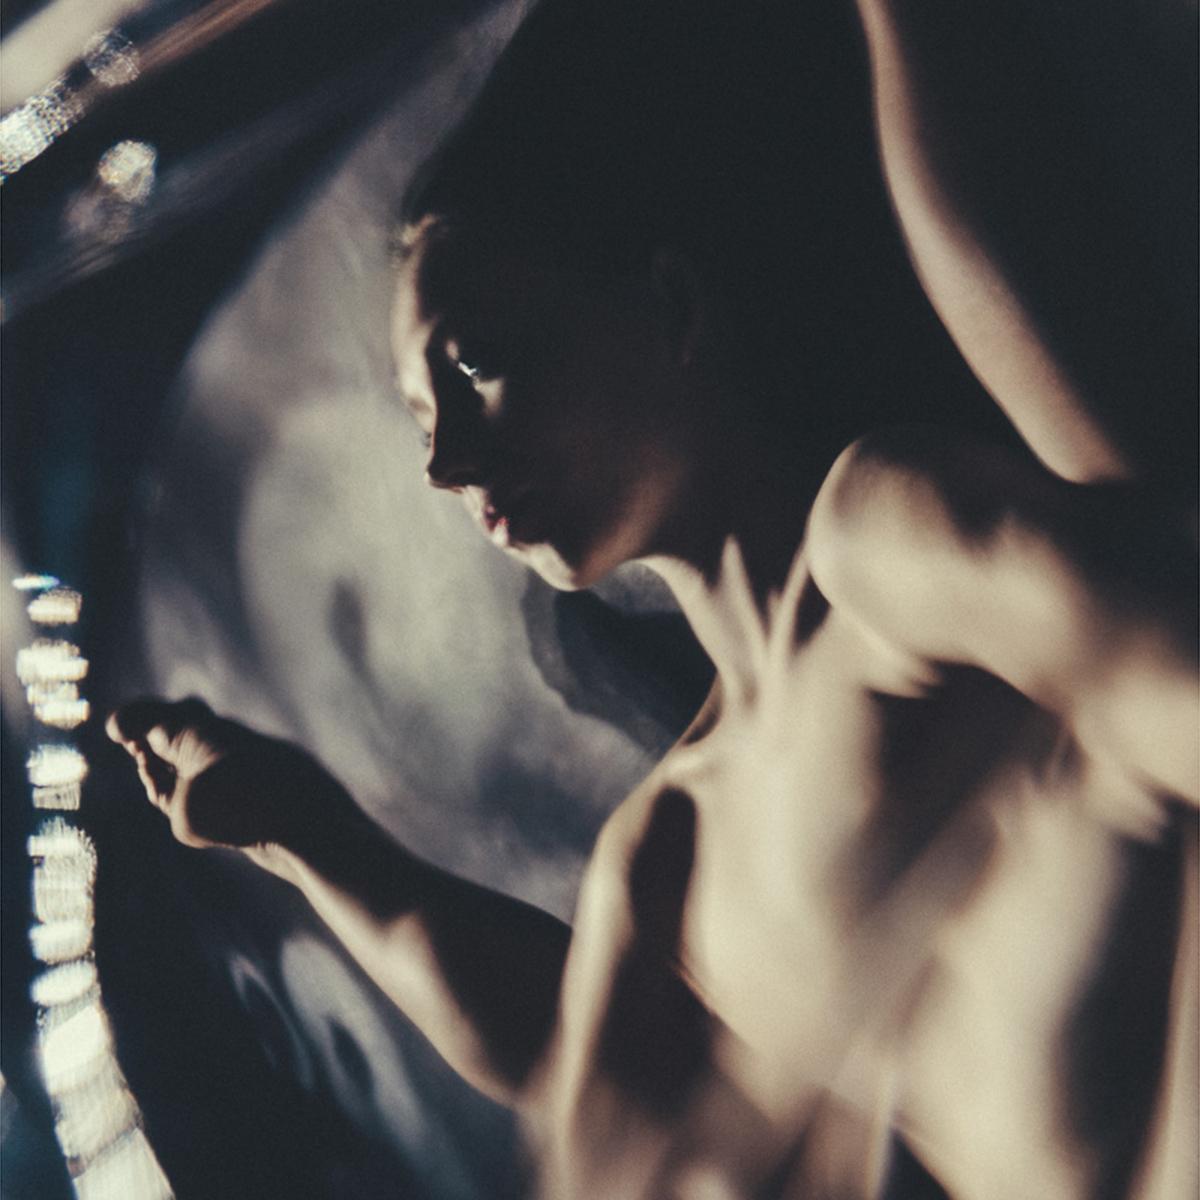 Marius Budu’s photographs explore the duality of strength and fragility in the human condition, creating almost abstract images that invite us to contemplate the beauty in the common elements of the body. His oeuvre is easily recognizable for the